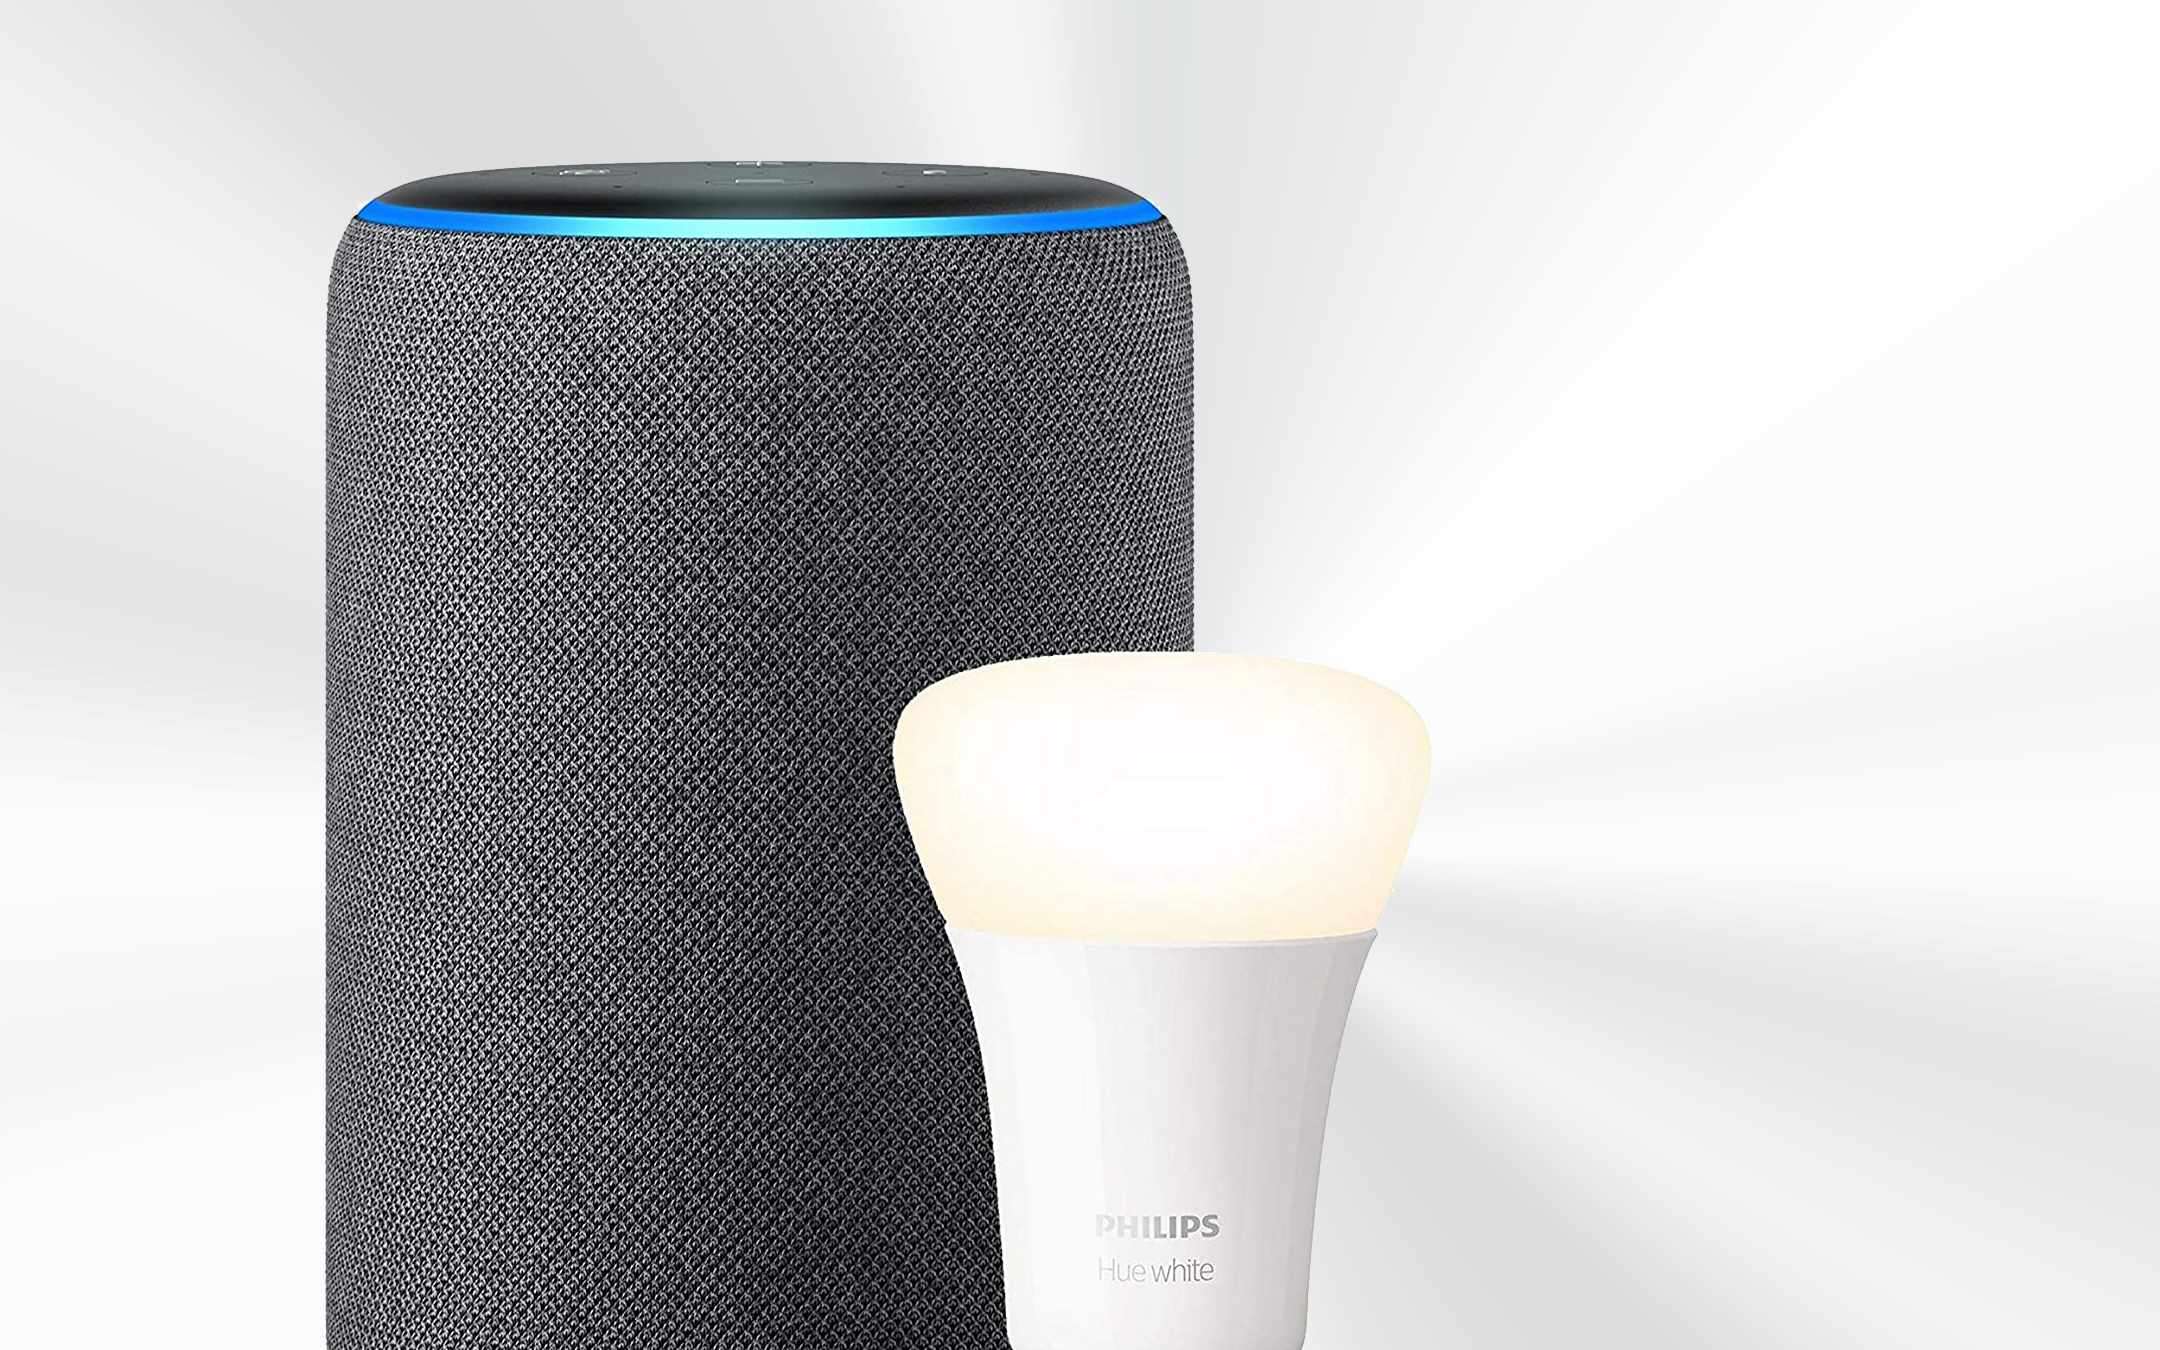 Amazon Echo Plus and Philips Hue: and light was - SportsGaming.win